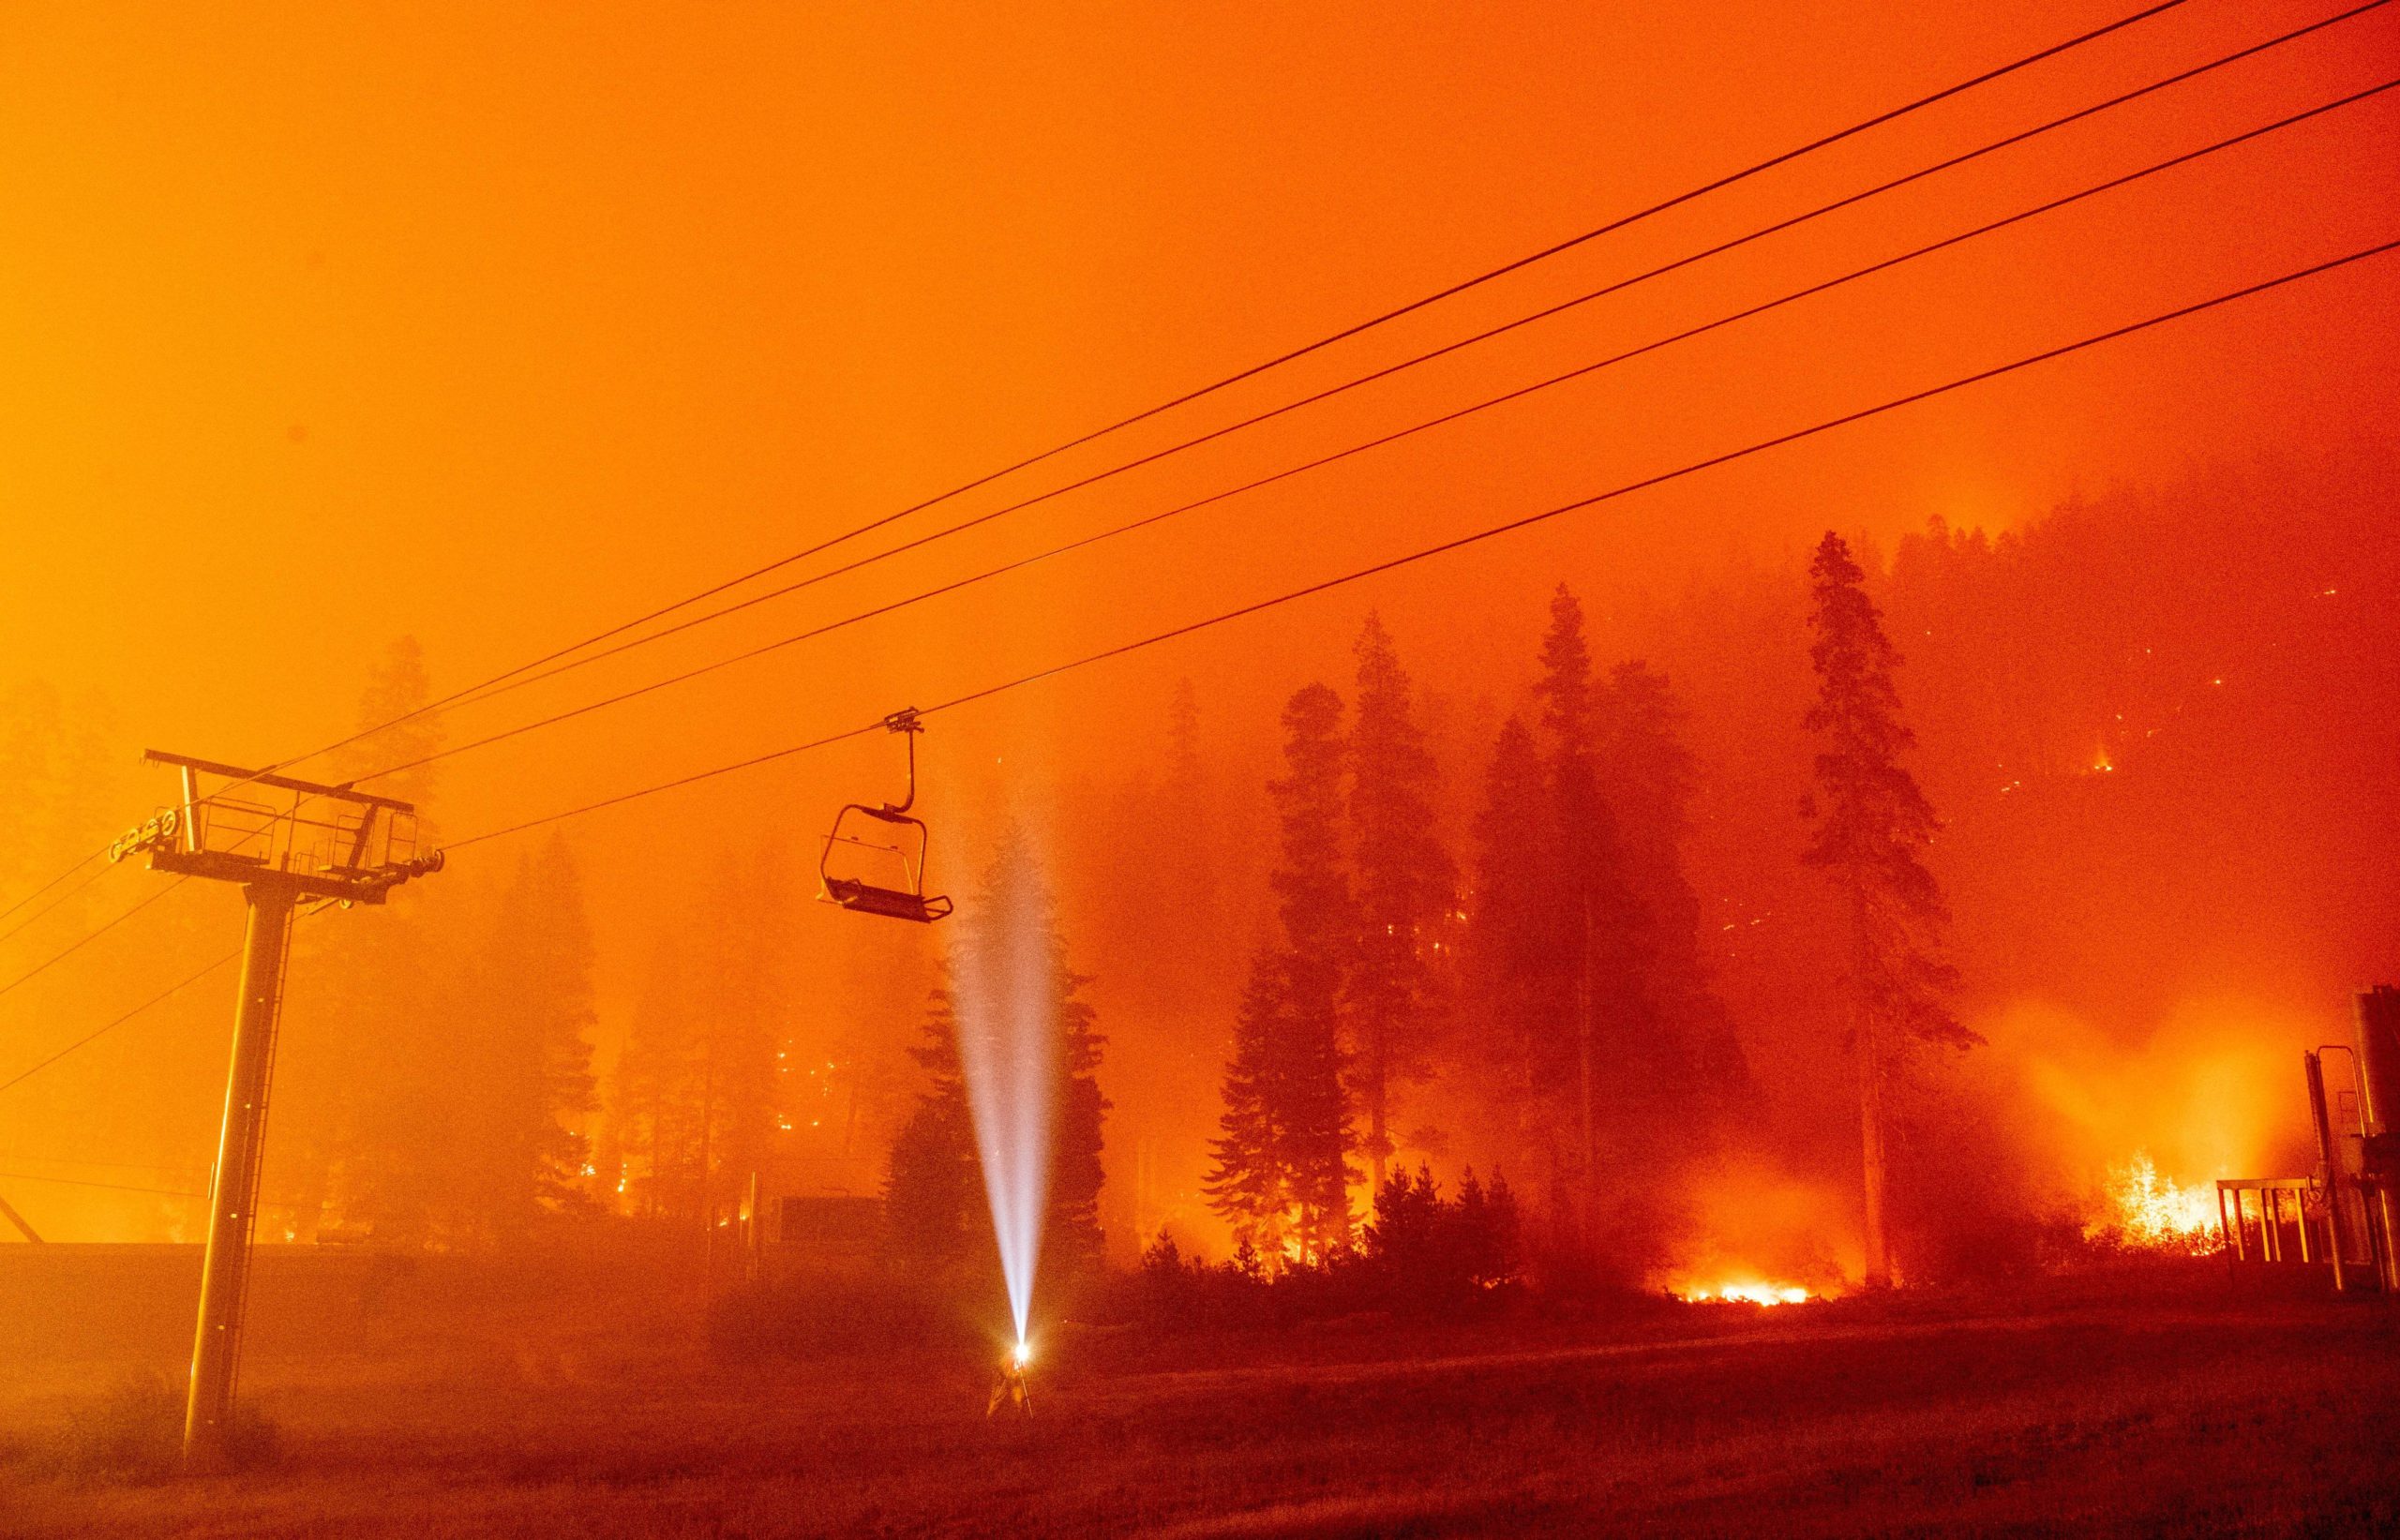 A photographer shines a flashlight towards a chair lift as flames surround Sierra-at-Tahoe Resort, a skiing area, during the Caldor fire in Twin Bridges, California, on Aug. 30, 2021 (Photo: Josh Edelson/AFP, Getty Images)